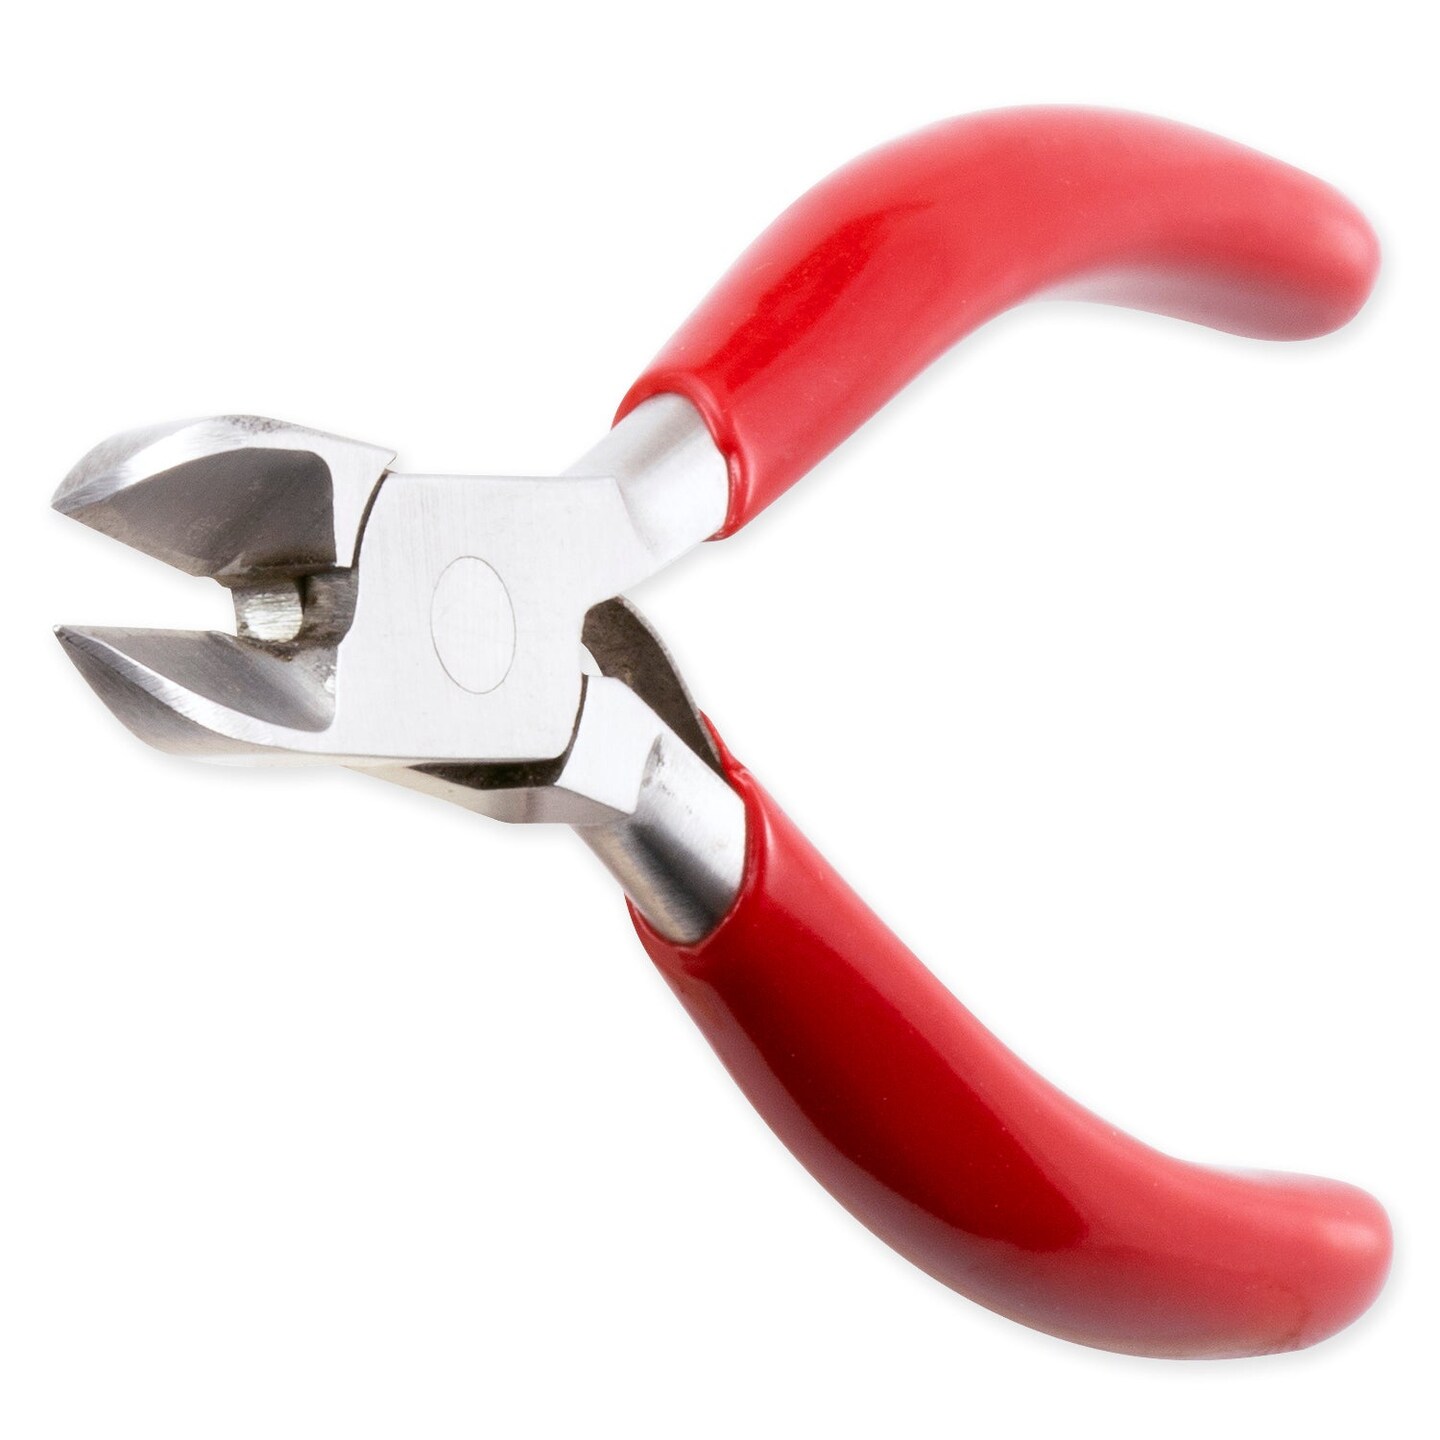 JewelrySupply Mini Side Cutting Pliers for your crafting and DIY projects